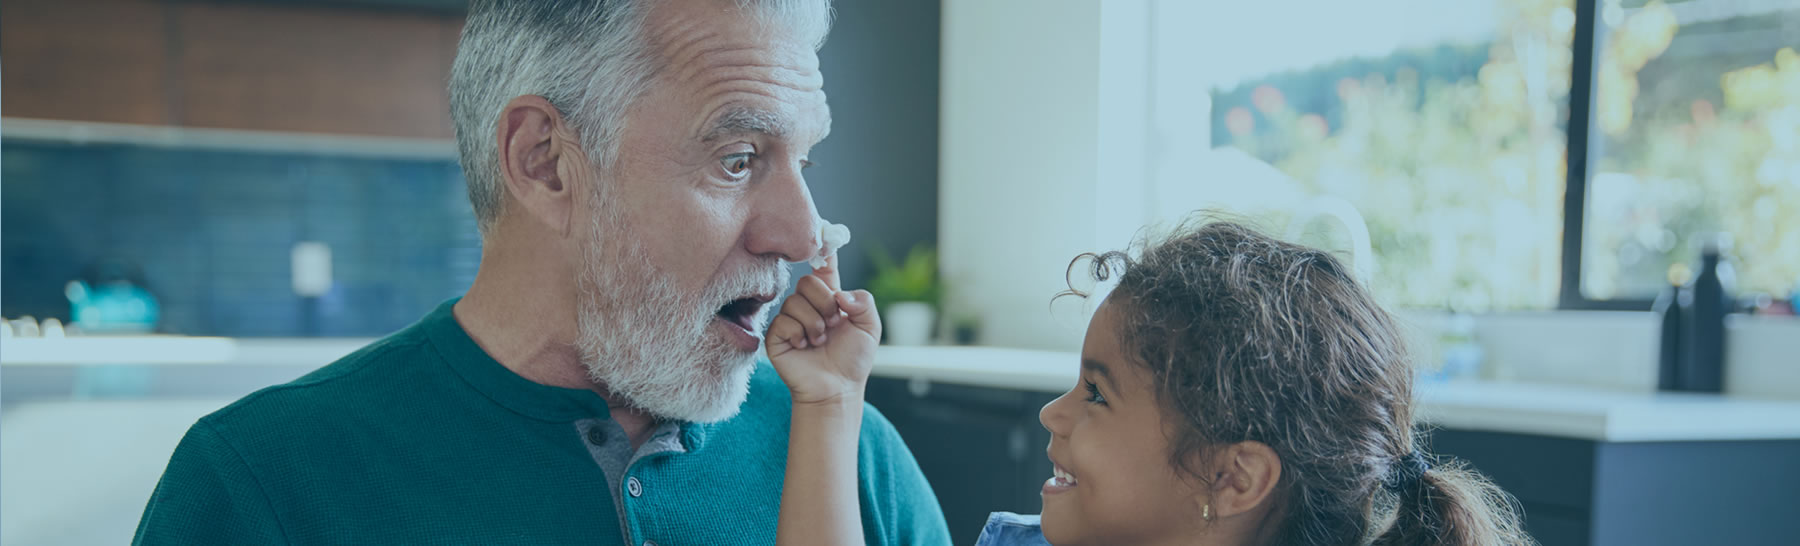 Grandchild putting frosting on grandfather's nose, while smiling